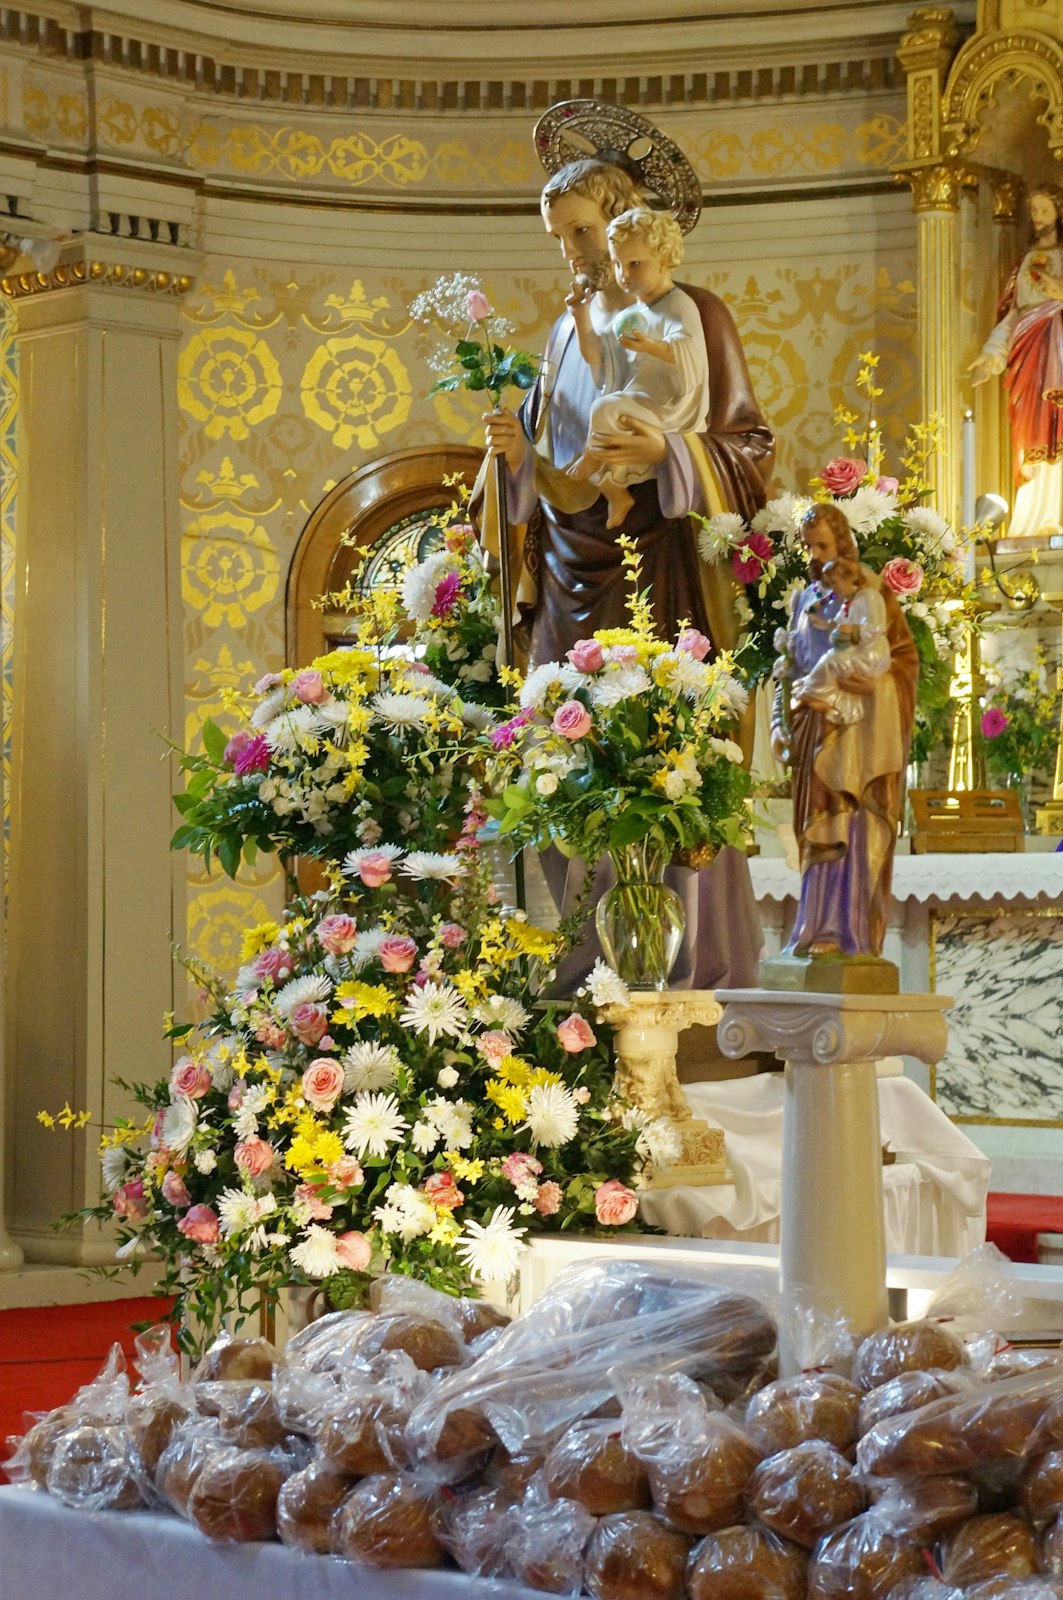 Tradition places the origin of the St. Joseph's Day table, or altar, during the Middle Ages, when local Sicilians prayed to the foster father of Jesus to end a drought. Centuries later, etiquette dictates that no one can be turned away from St. Joseph's table, in recognition of God's providence for all through the foster father of Jesus.